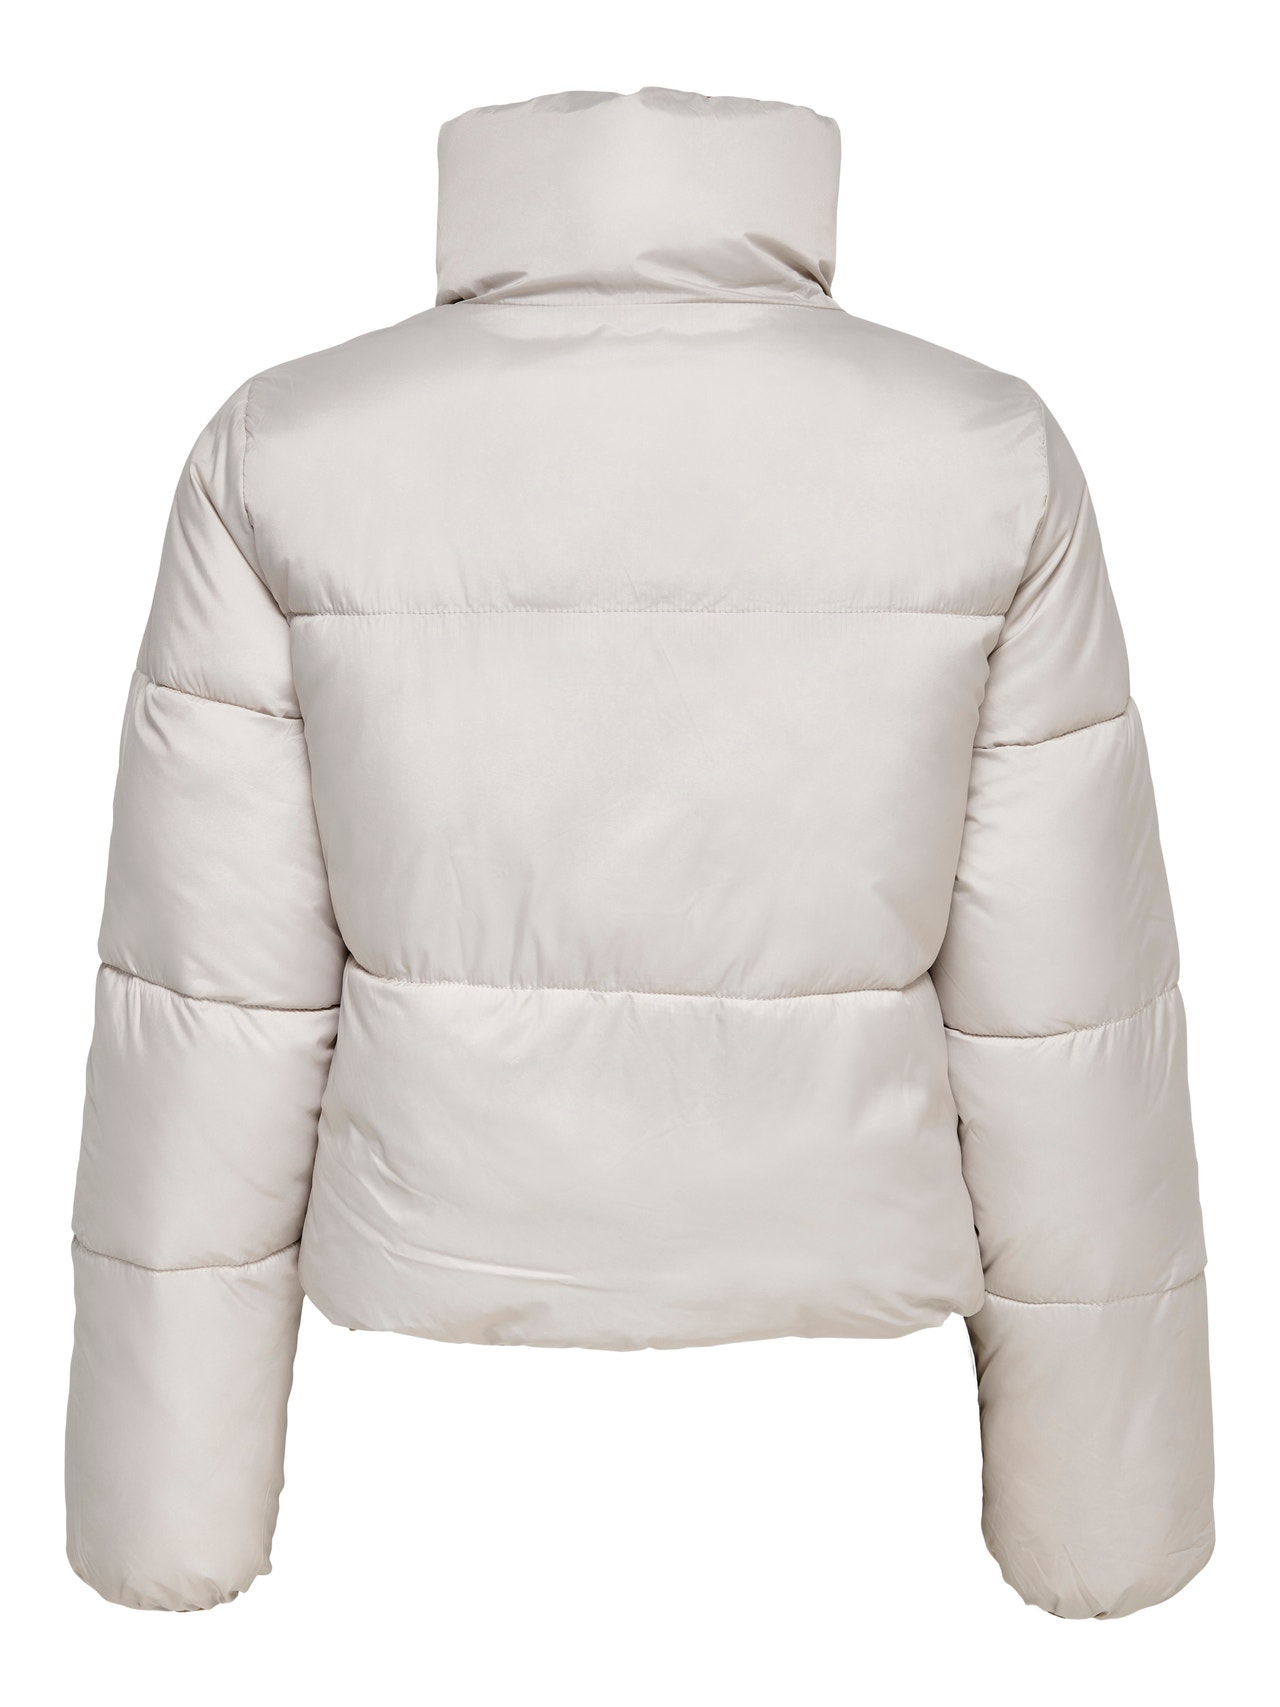 ONLY Reversible Chaqueta acolchada -Silver Lining - 15262394